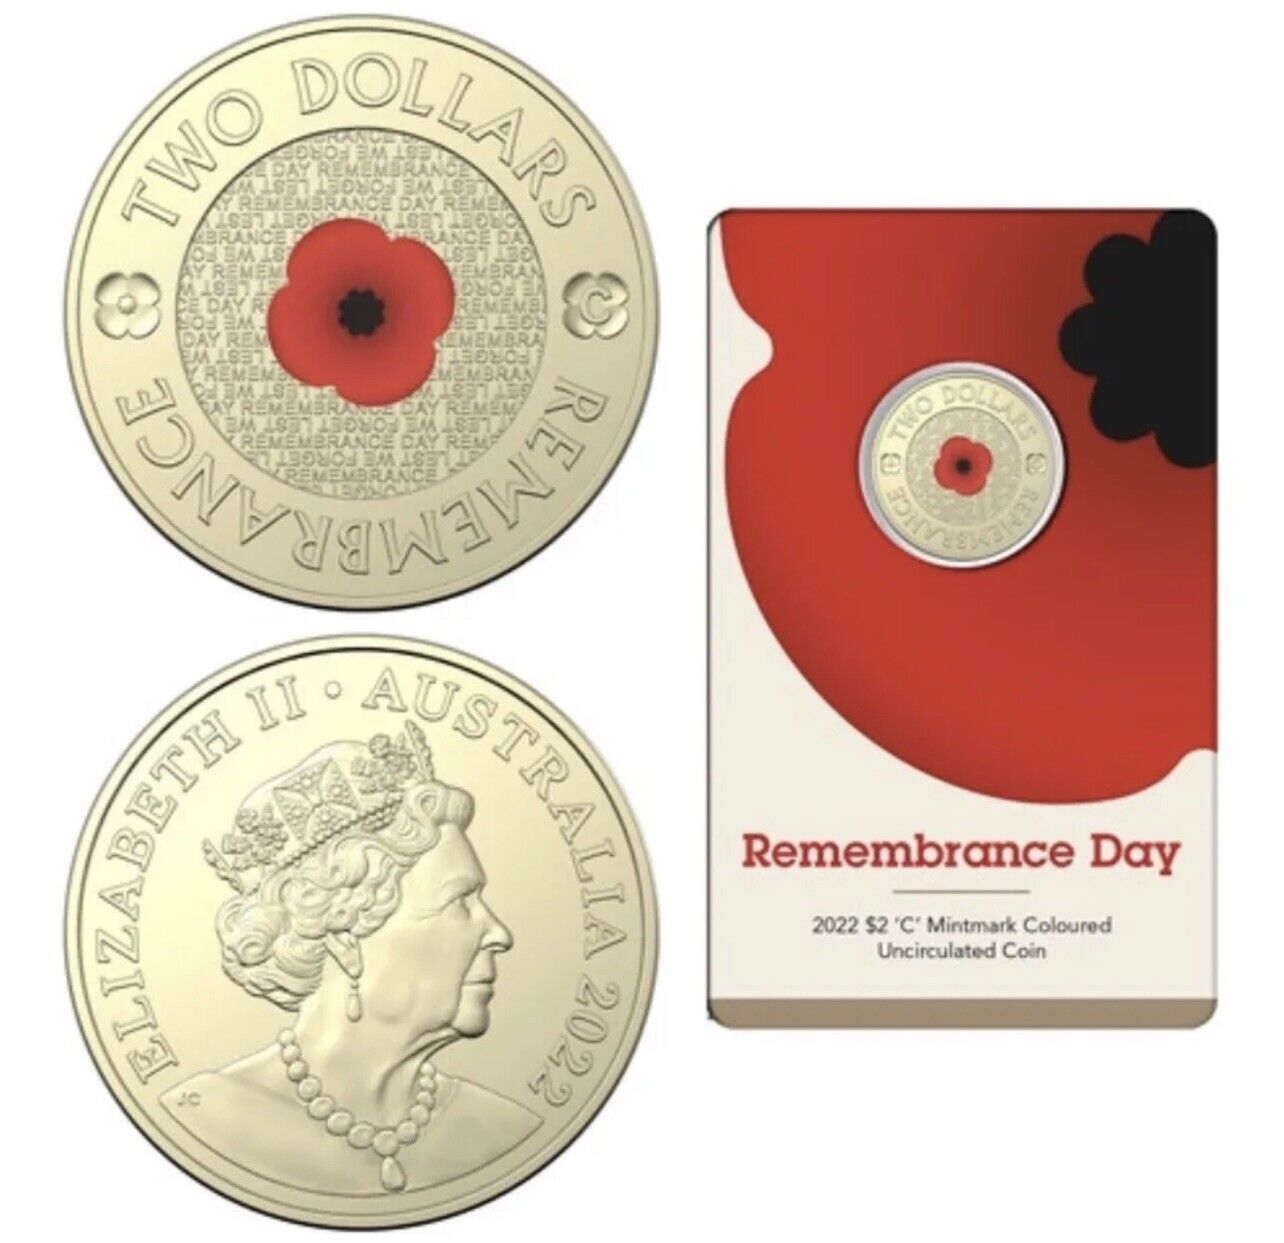 Remembrance Day 2022 $2 C Mintmark Coloured Uncirculated Coin IN HAND